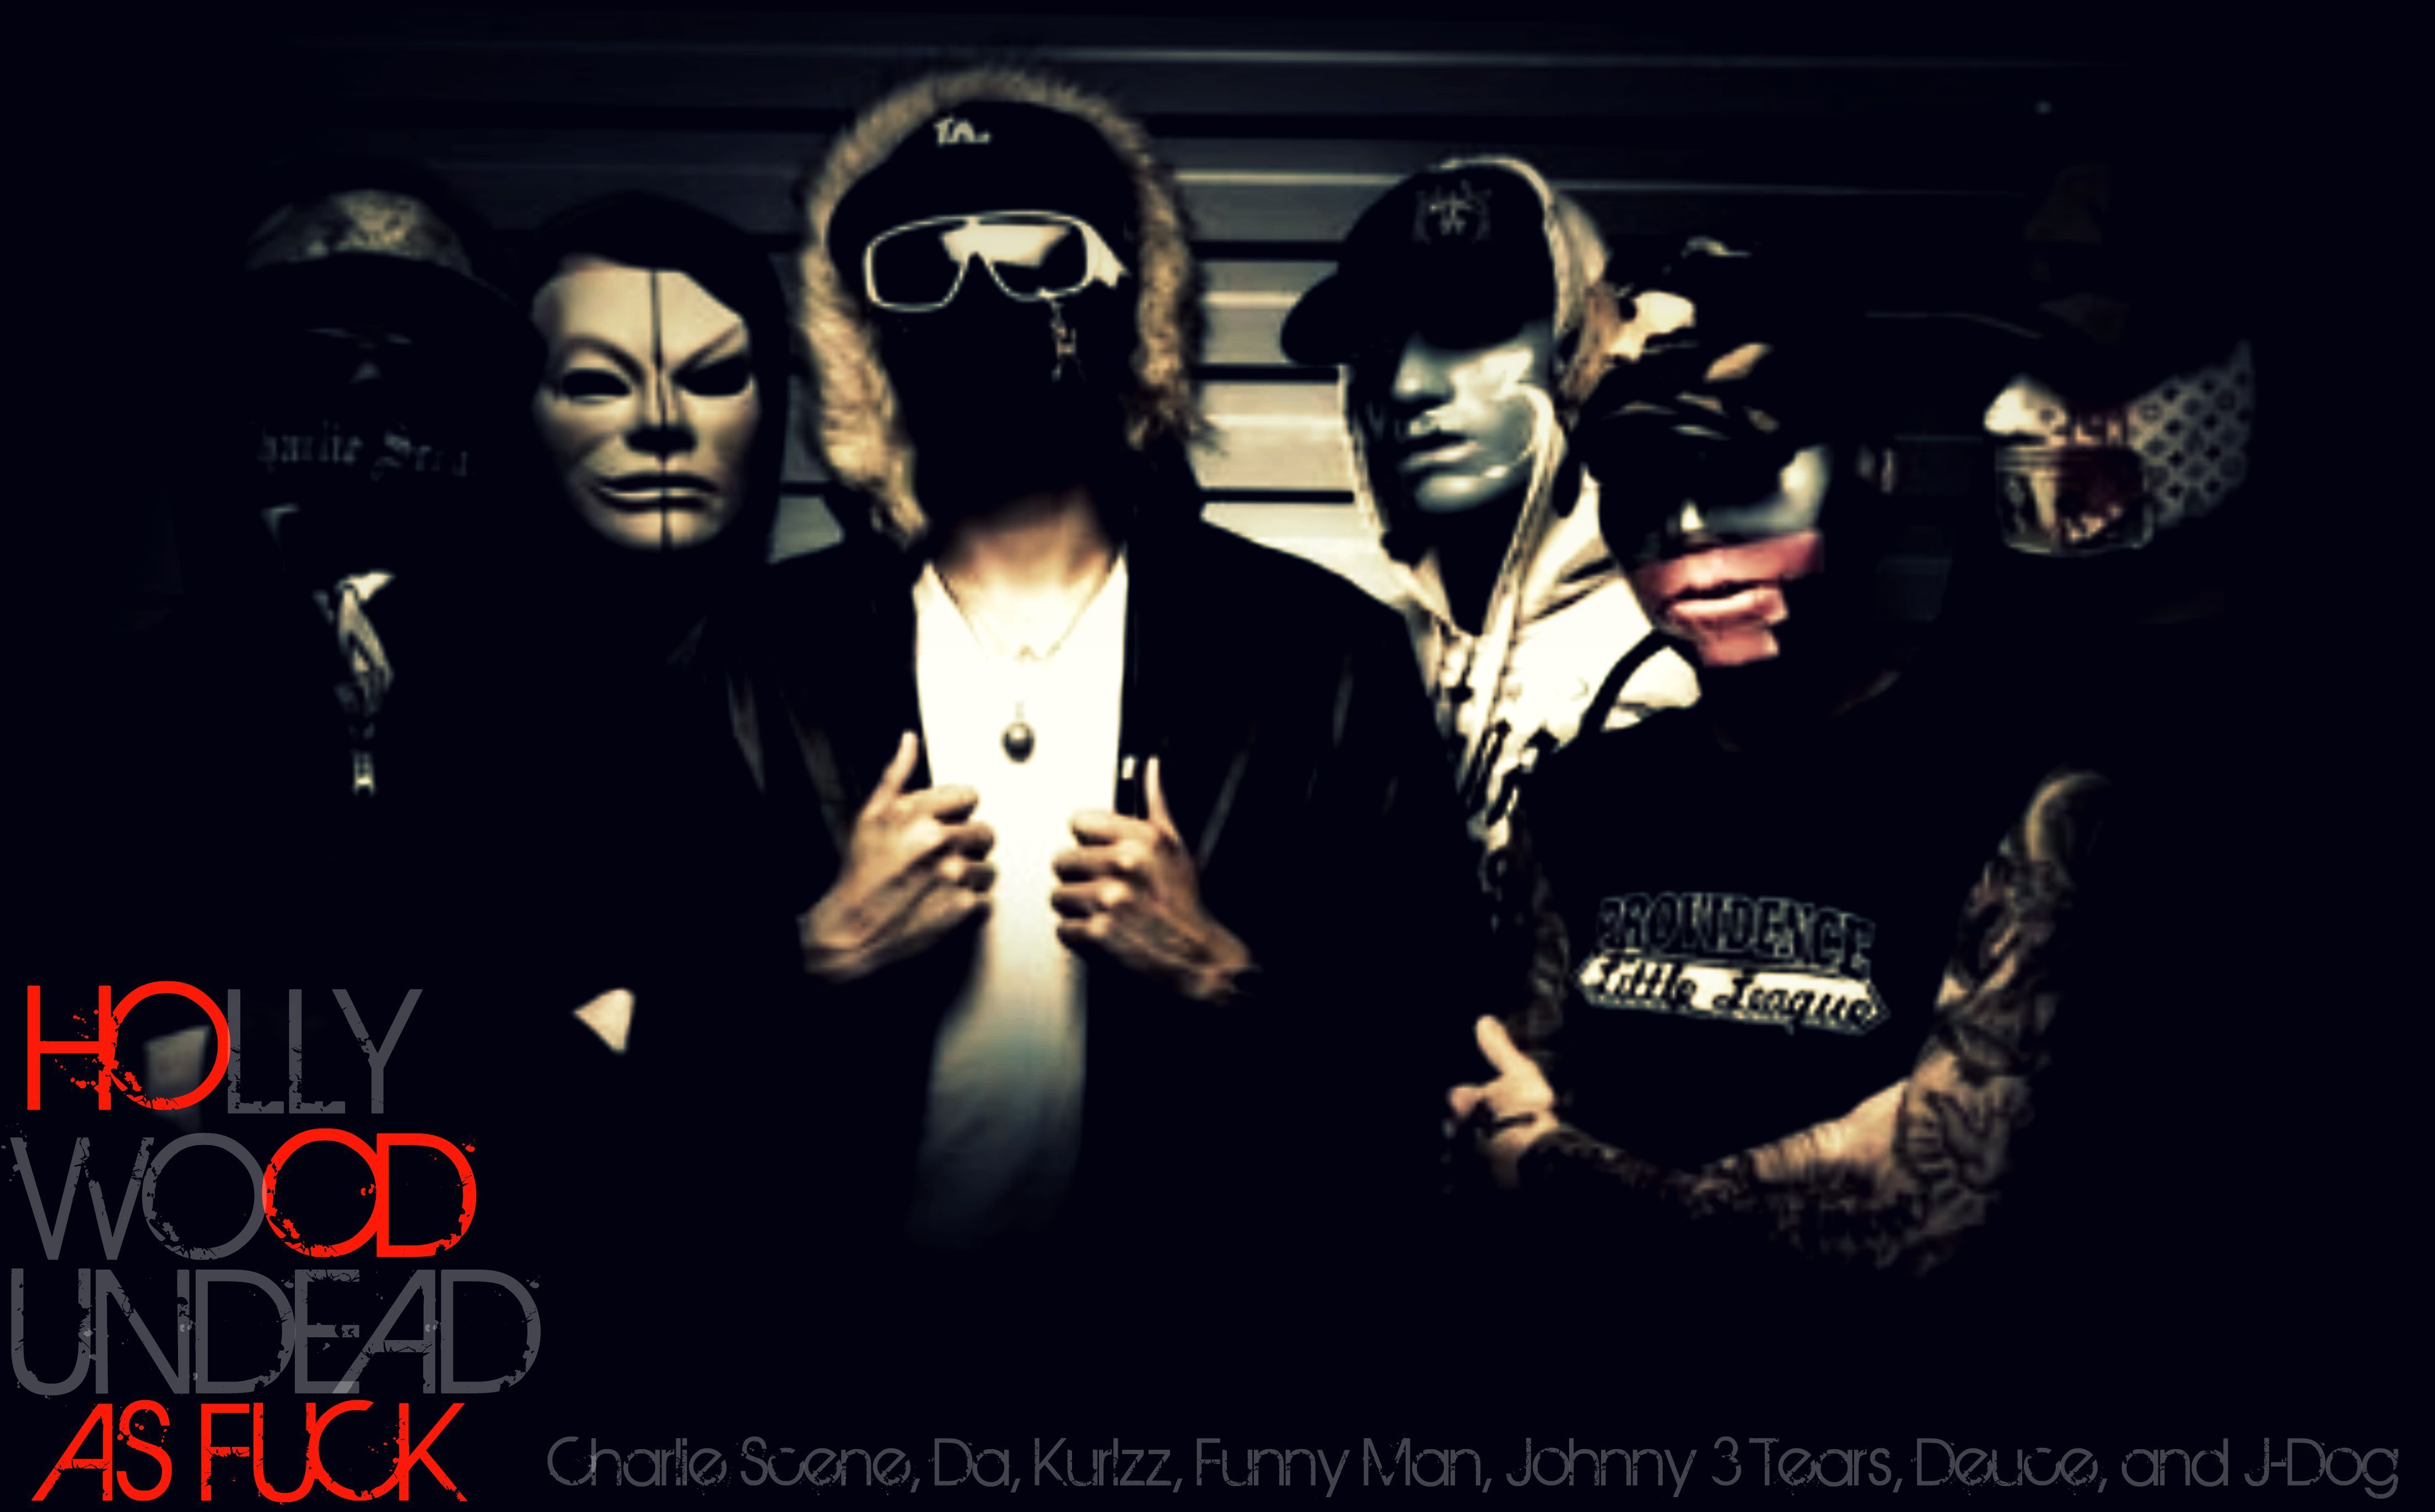 Hollywood Undead - Wallpaper 11 by WelcometoBloodstone on DeviantArt